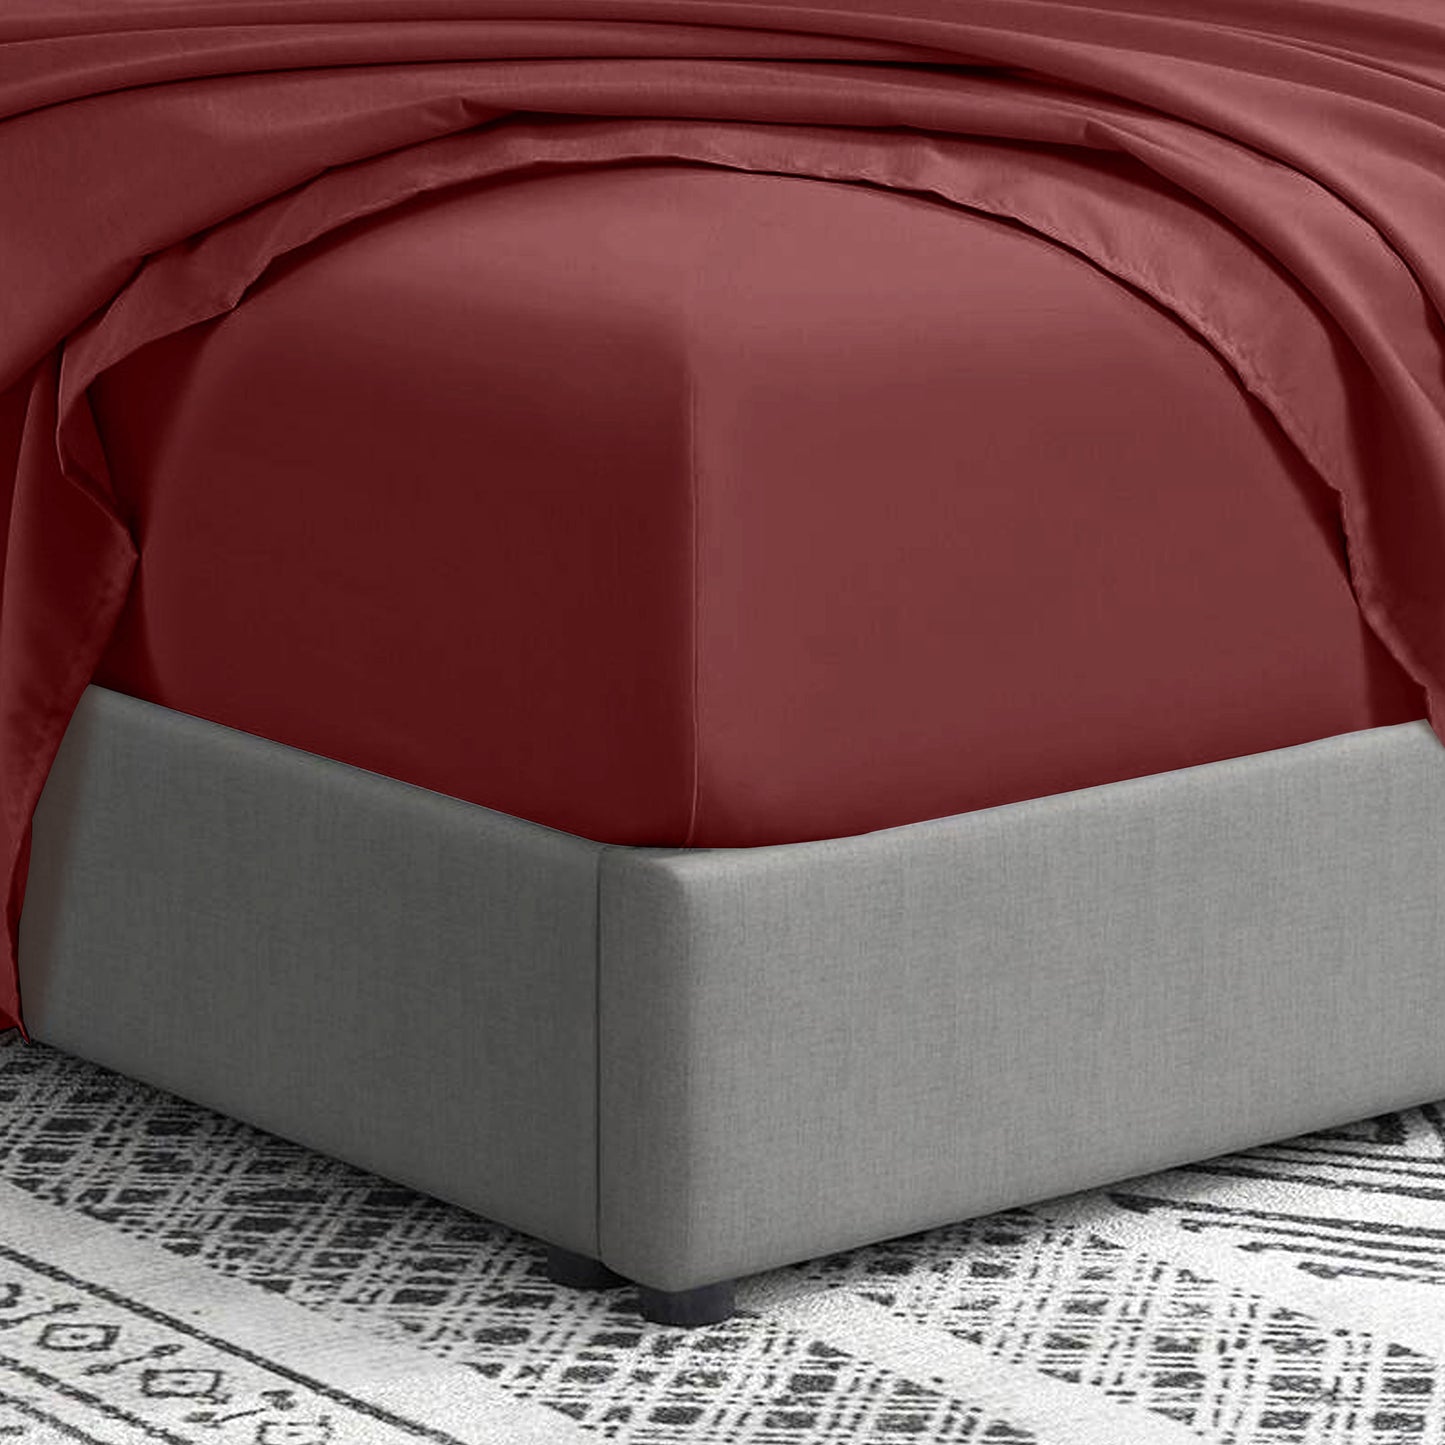 Maroon - Fitted sheet - King size(3-pcs)